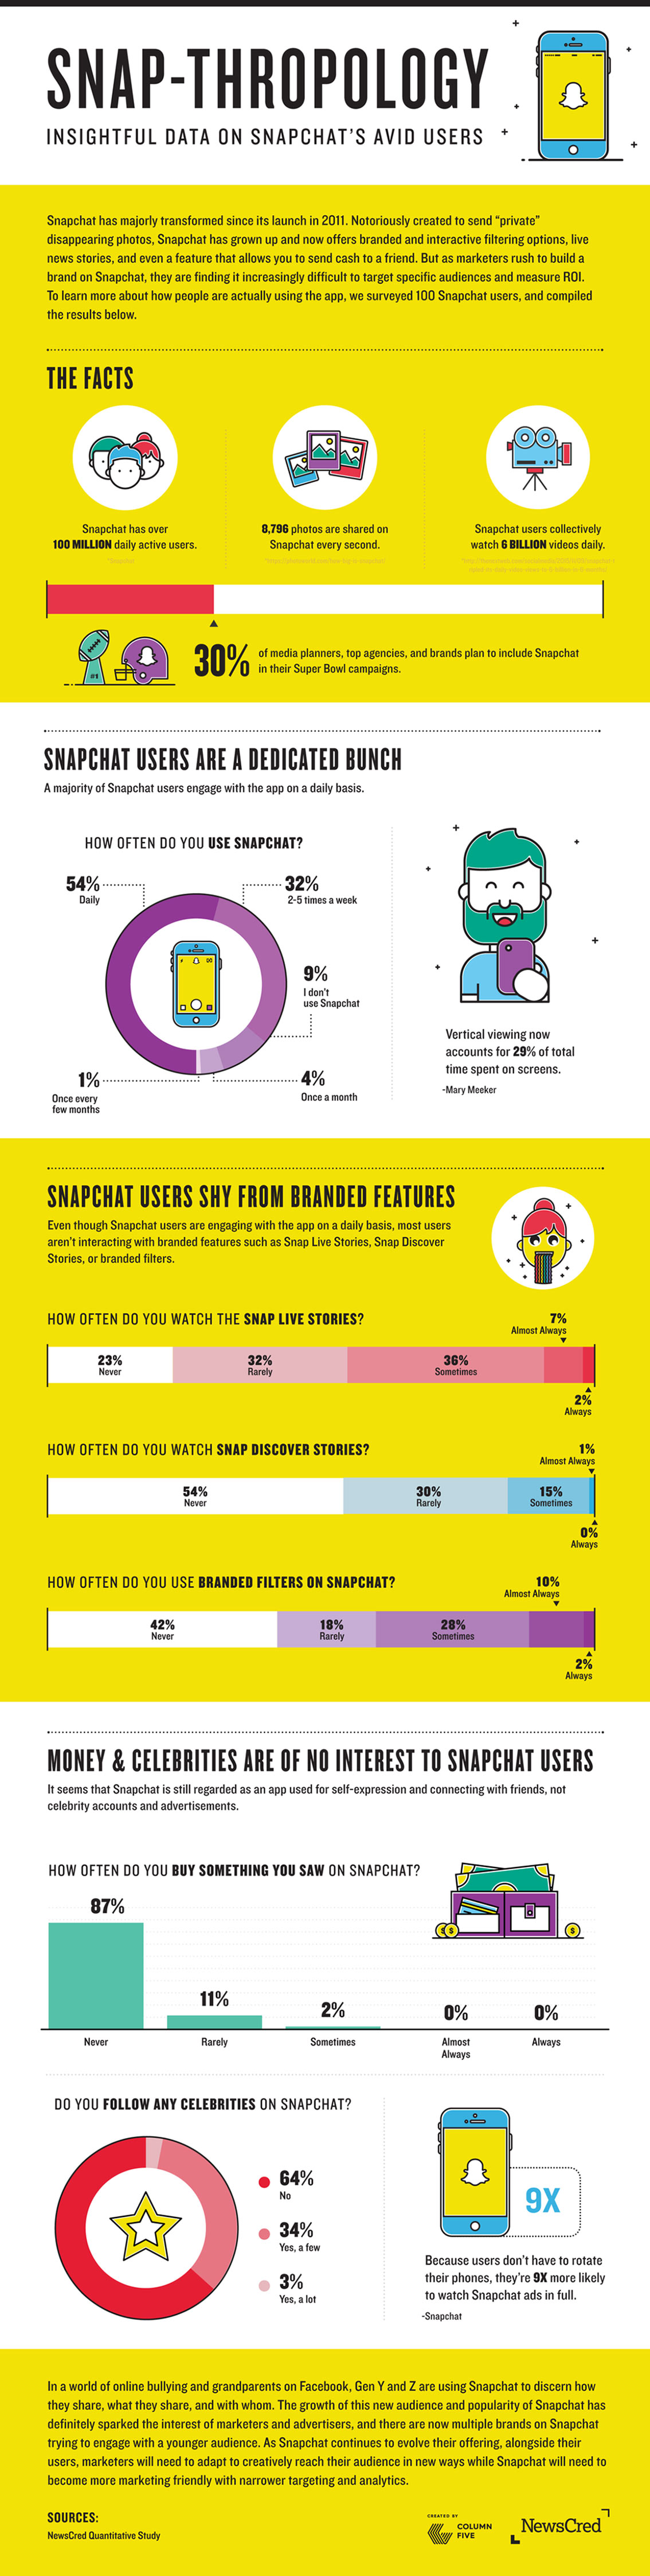 Snap-Thropology Insightful Data on Snapchat Avid Users Infographic